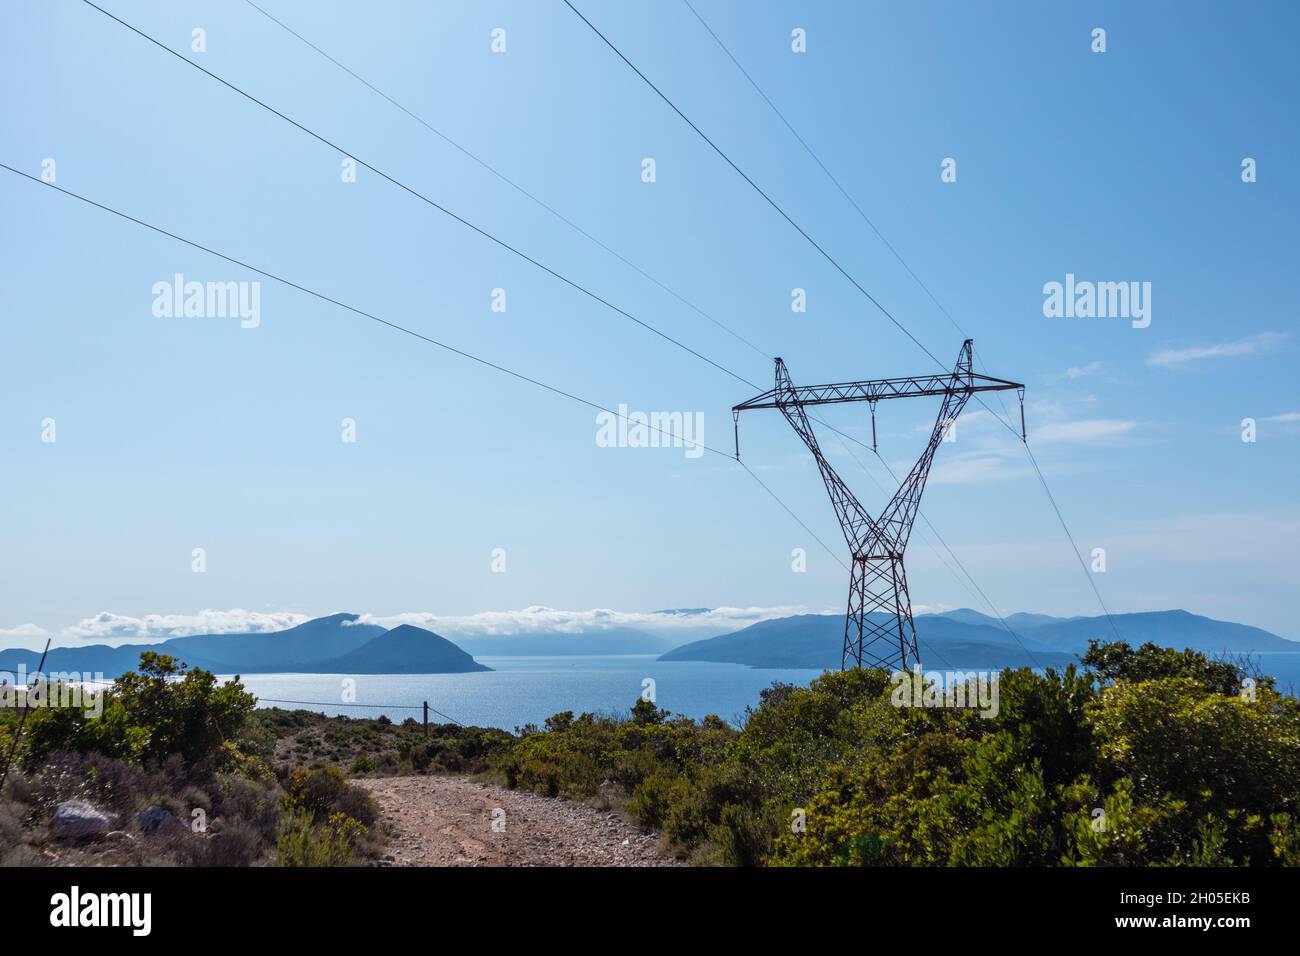 Panoramic landscape of Lefkada island coast in Greece with green woods, blue sky and electrical support line. Summer travel Stock Photo